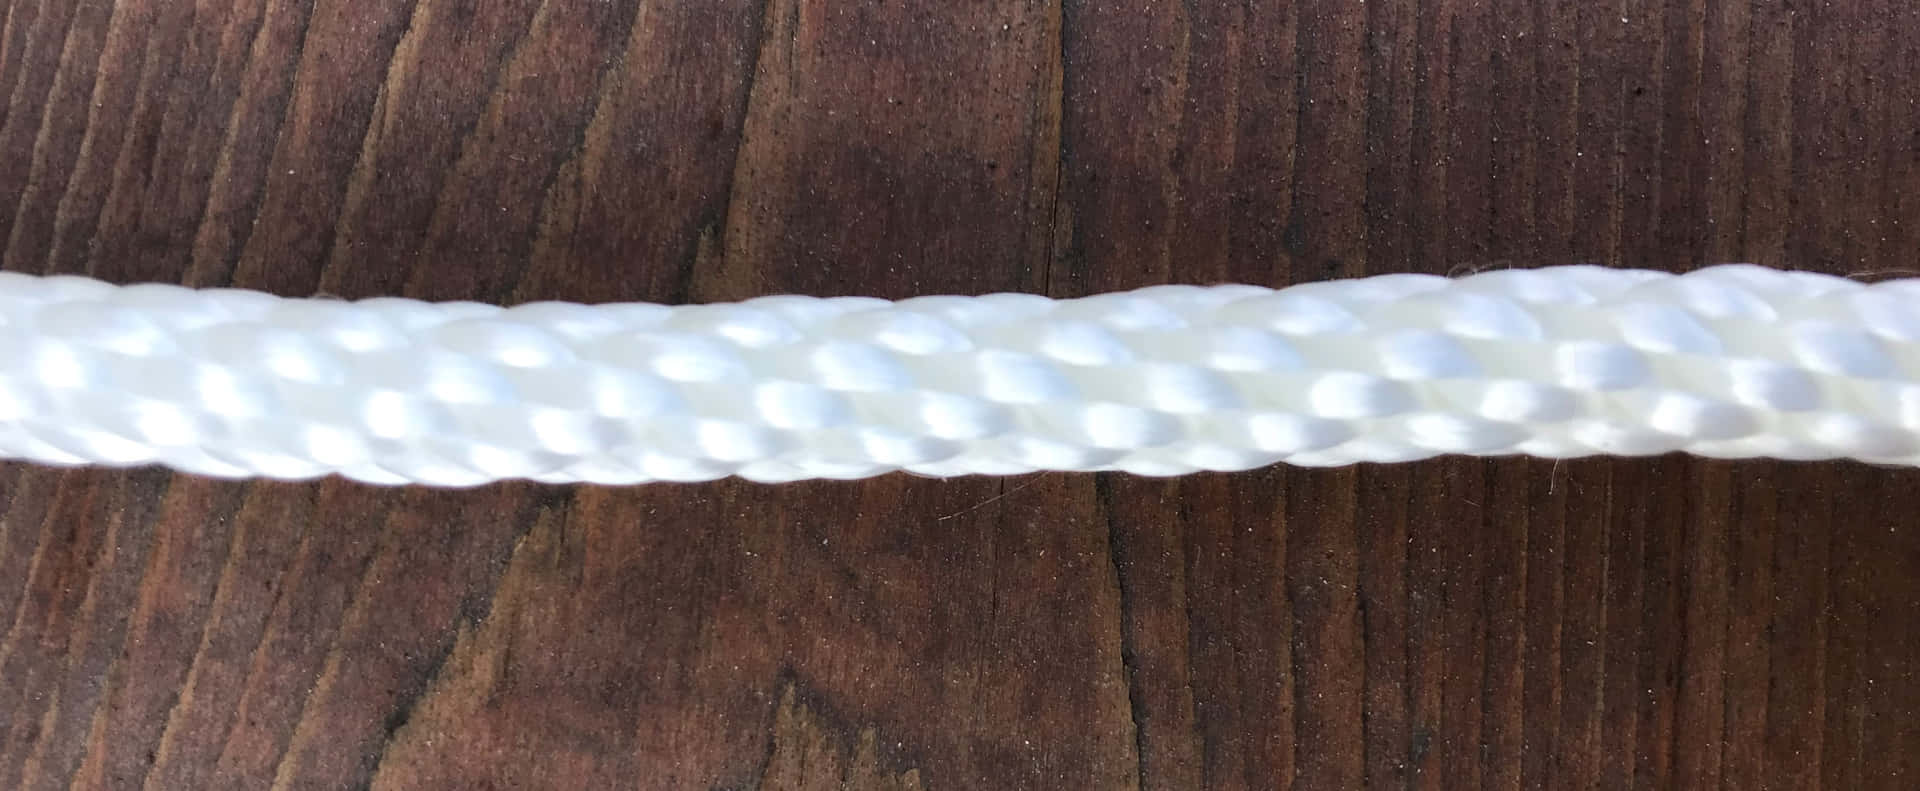 Braided White Rope Picture